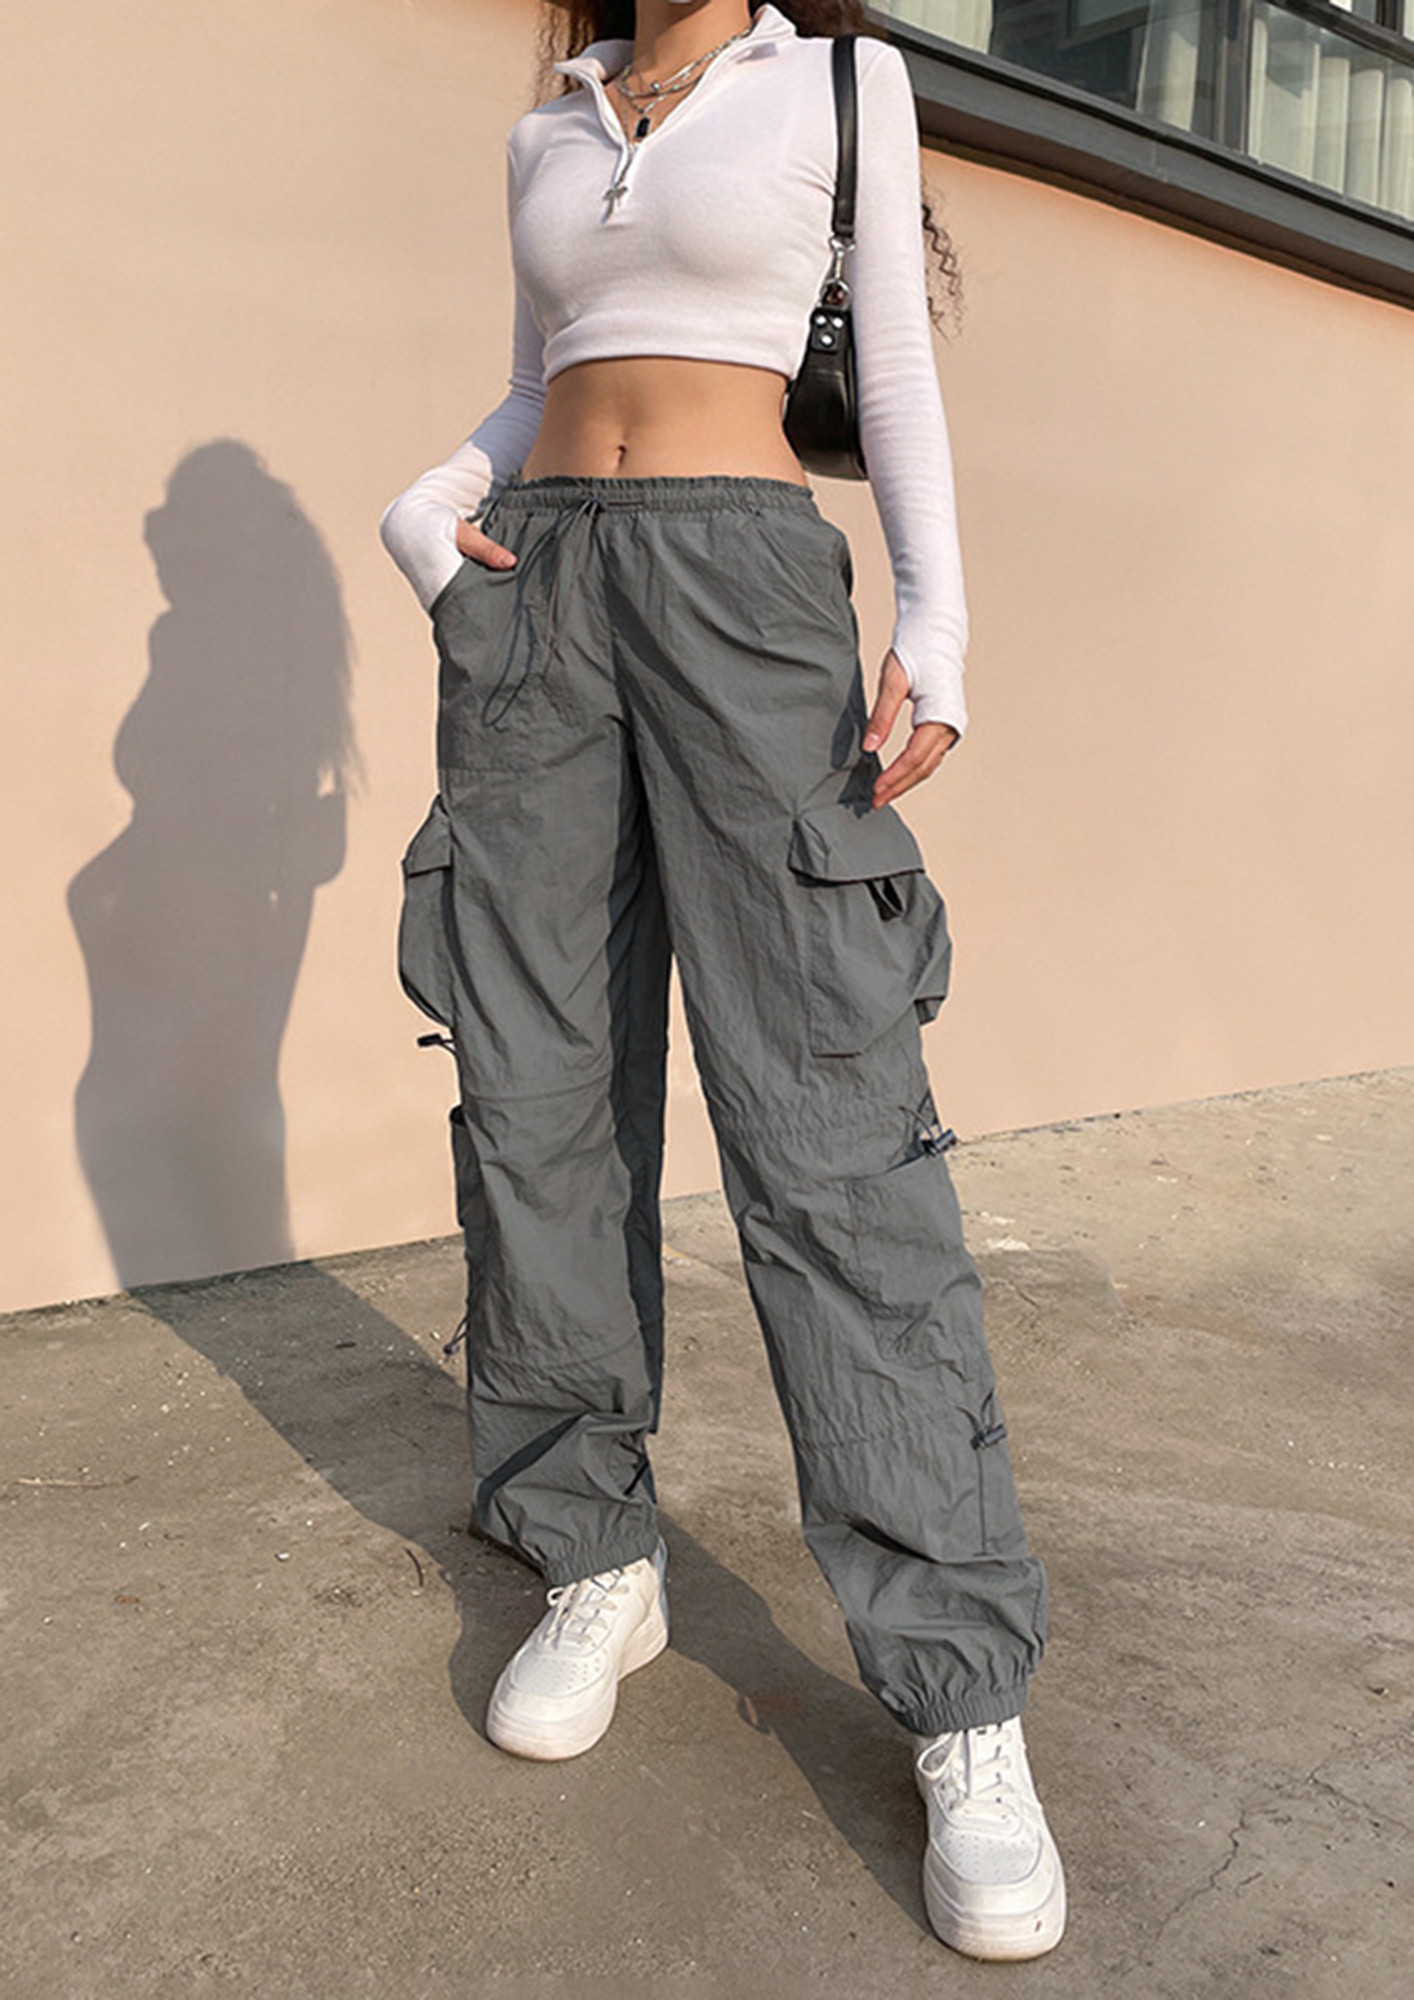 Aggregate 170+ cargo pants for women best